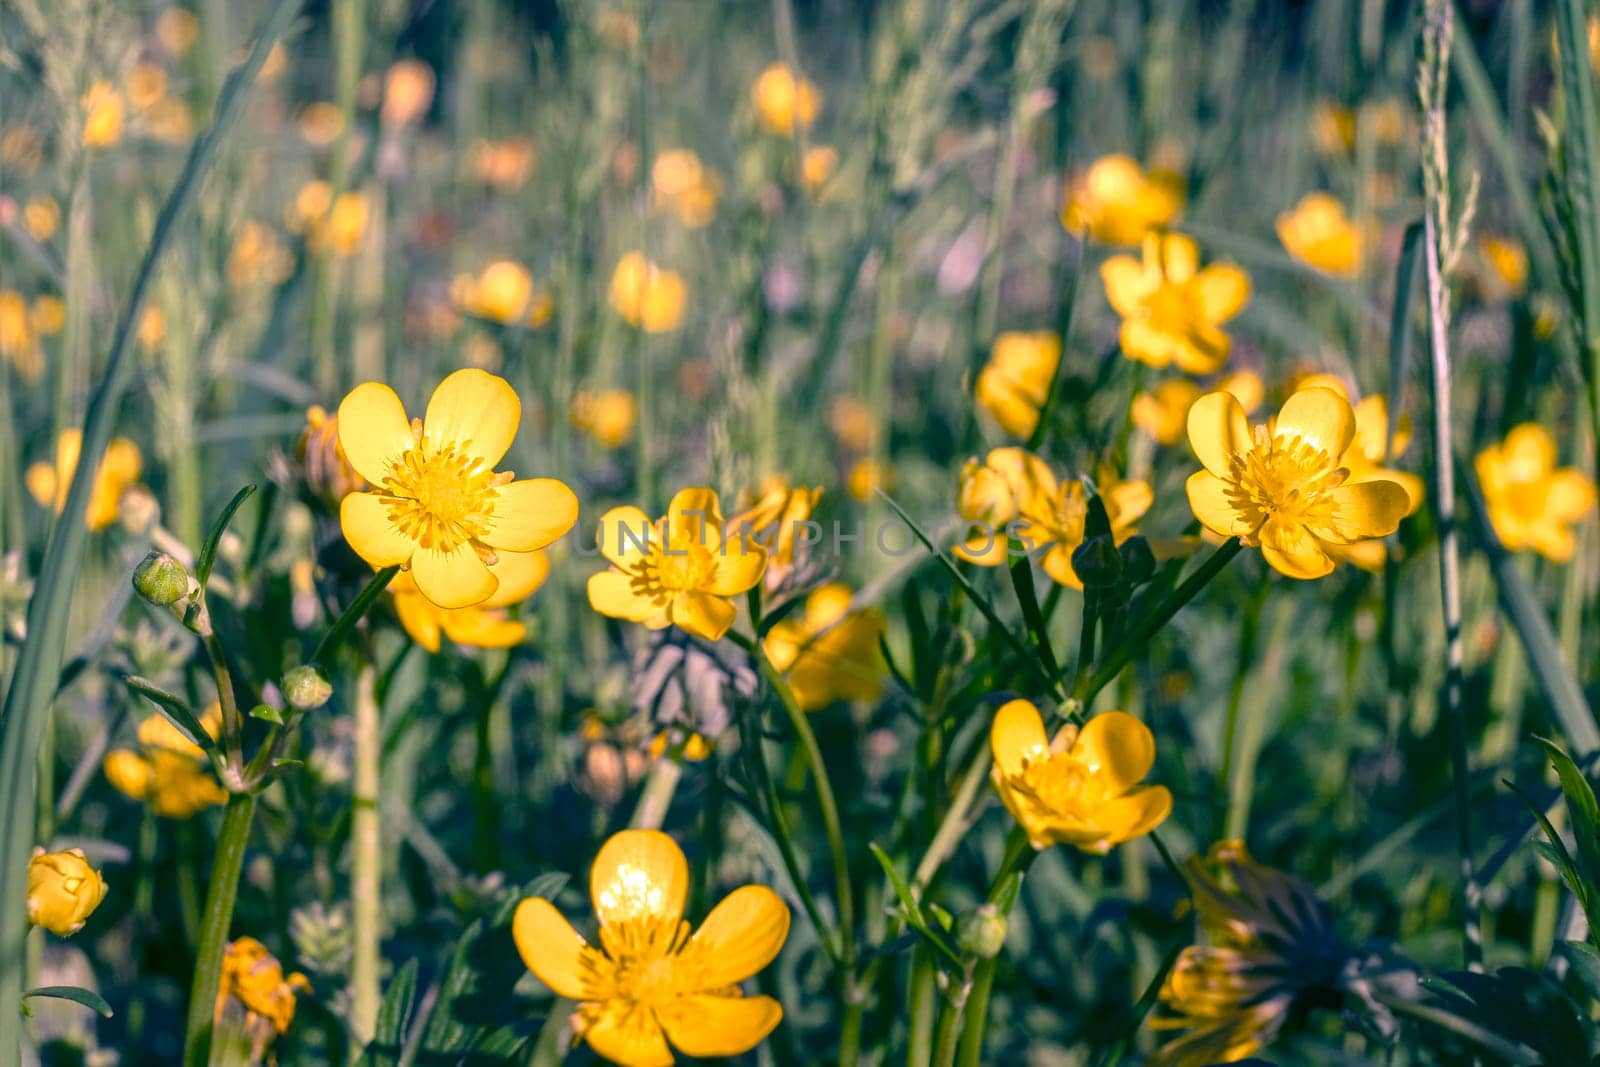 Field of yellow flowers and green grass defocus, in the foreground is a yellow flower. by Annavish